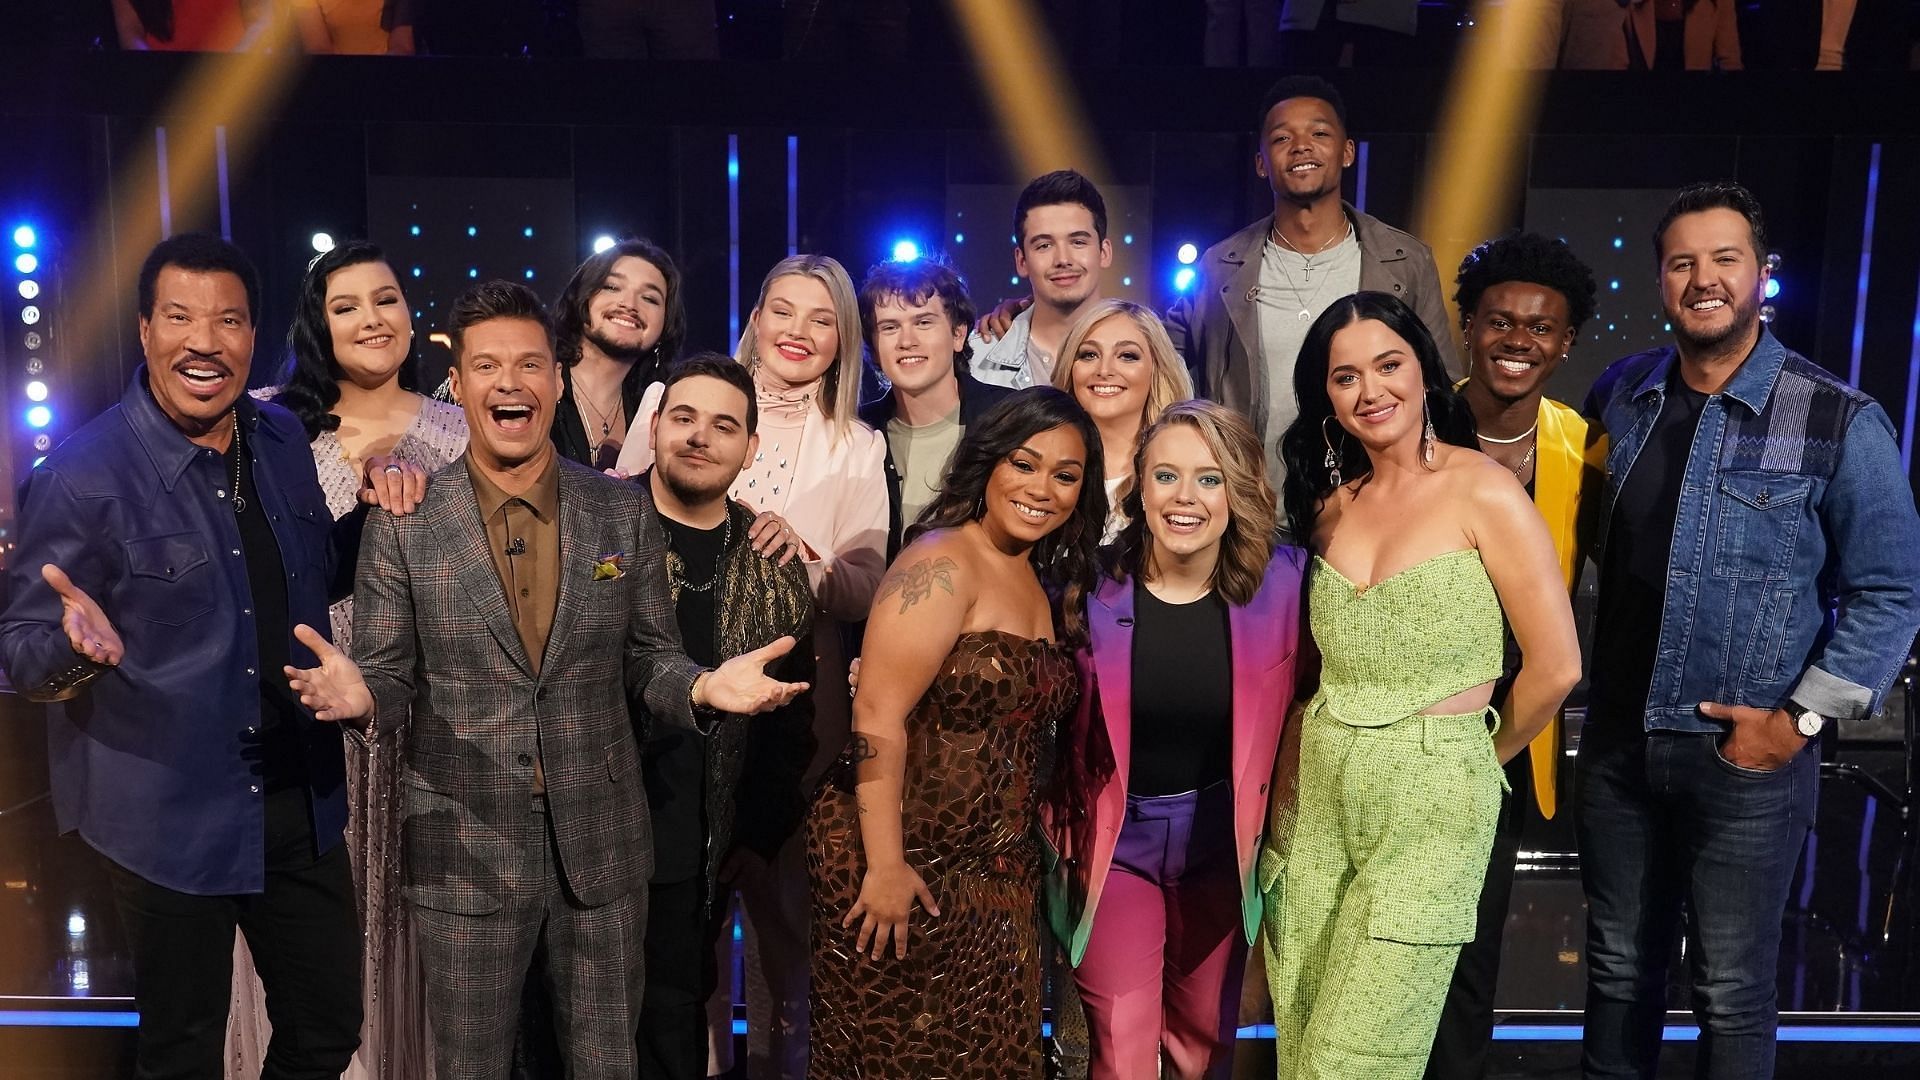 American Idol Top 11 contestants have a tough fight ahead (Image via Eric McCandless/ABC)